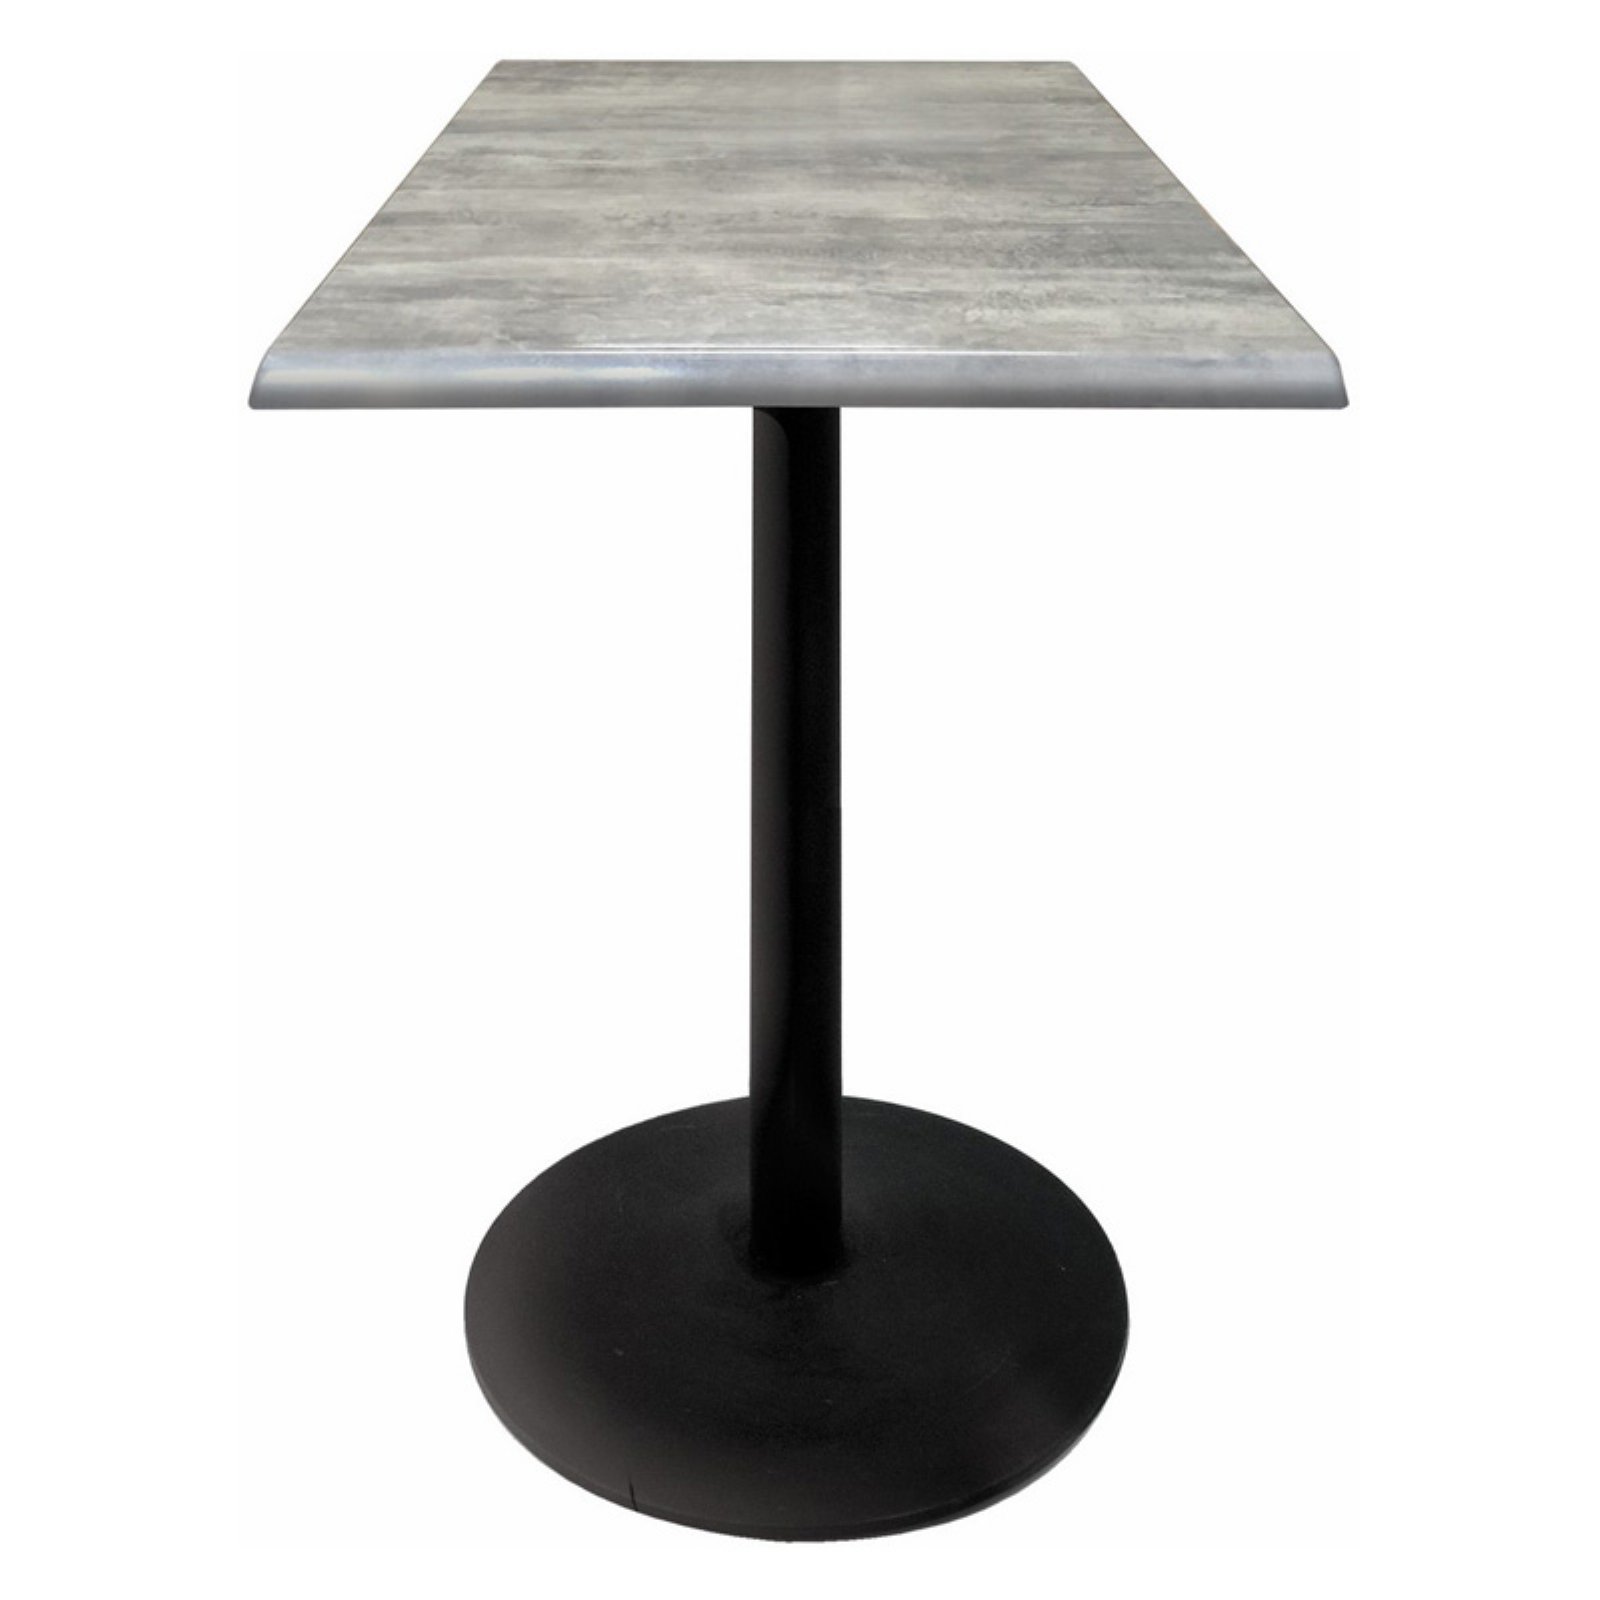 Indoor/Outdoor 30" Tall OD214 Black Table Base with 22" Diameter Foot and 36" x 36" Square Indoor/Outdoor Rustic Top by the Holland Bar Stool Co. - image 3 of 5